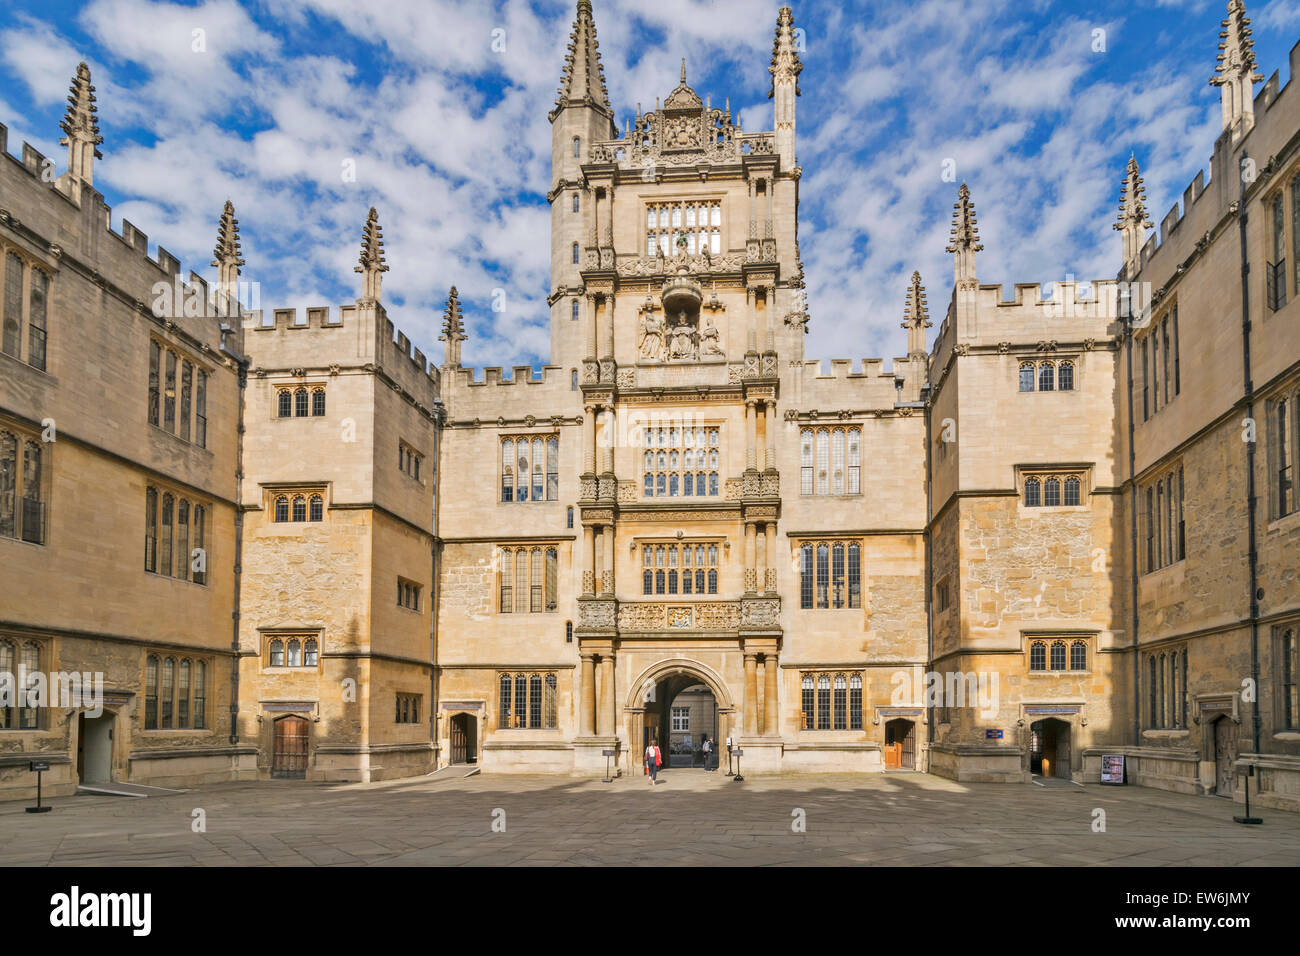 OXFORD CITY THE BODLEIAN LIBRARY AND COURTYARD Stock Photo